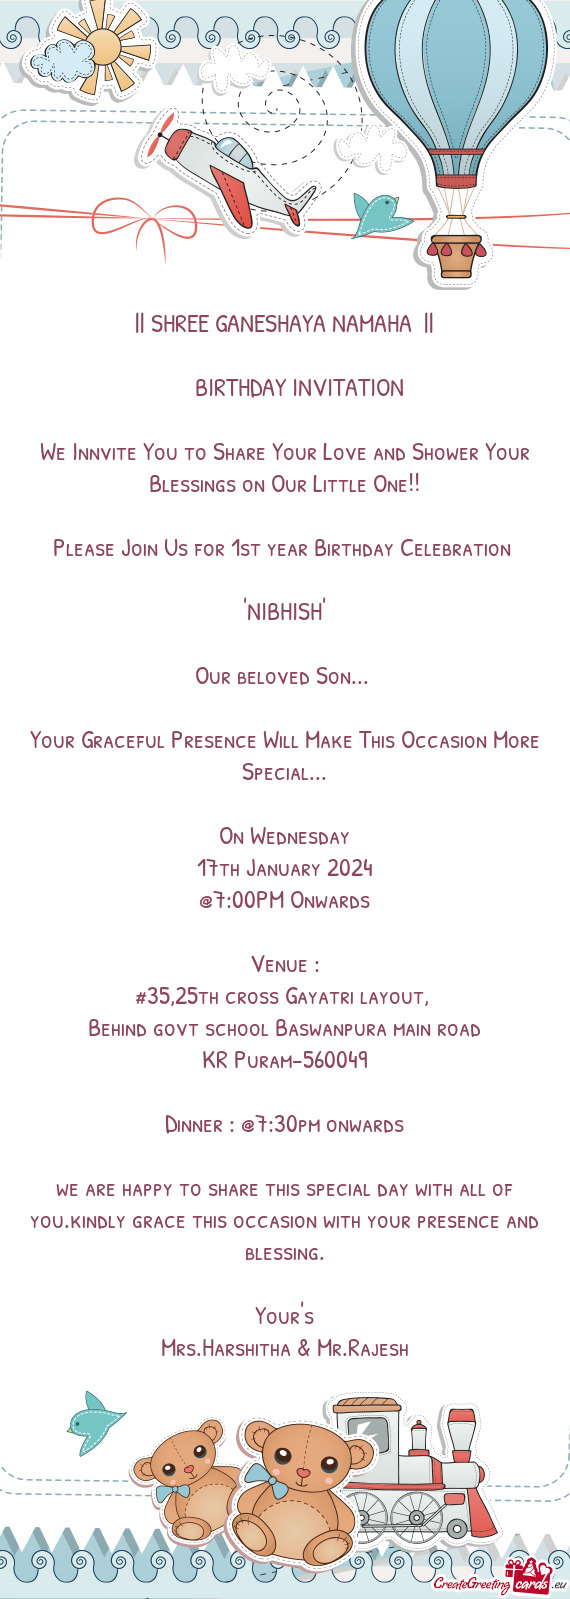 Please Join Us for 1st year Birthday Celebration